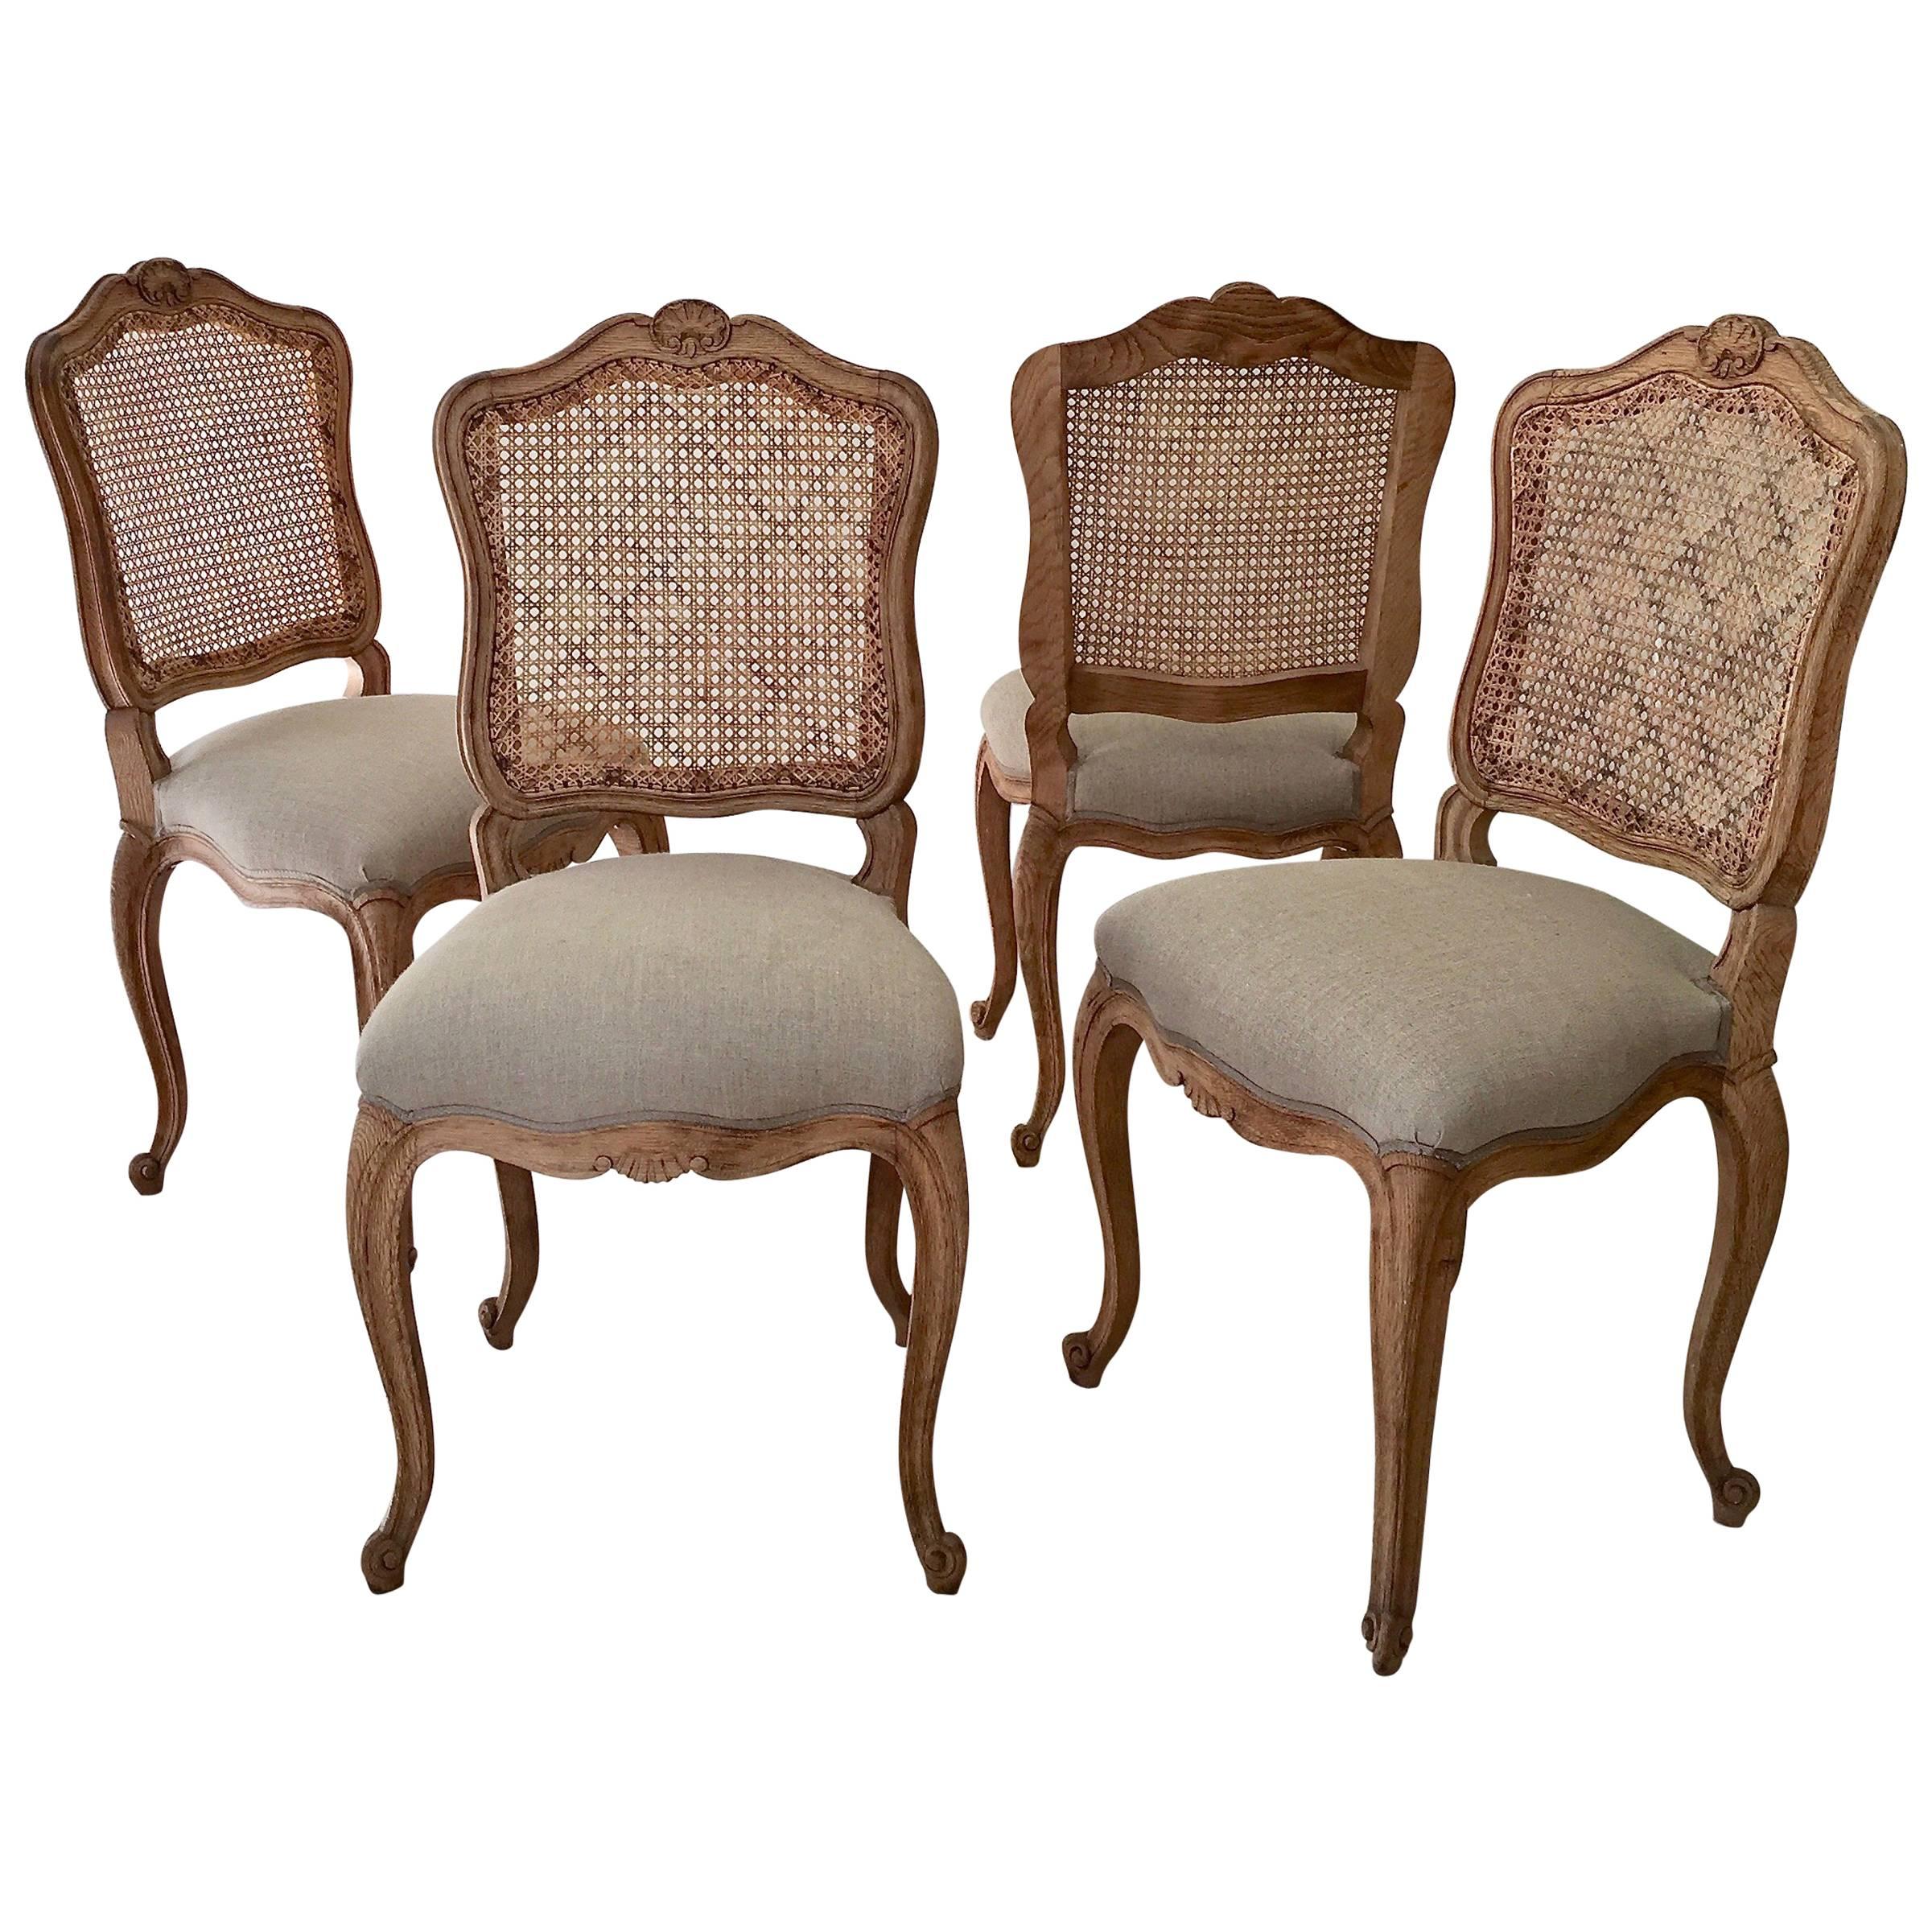 Set of Four French, LXV Style Chairs with Cane Back